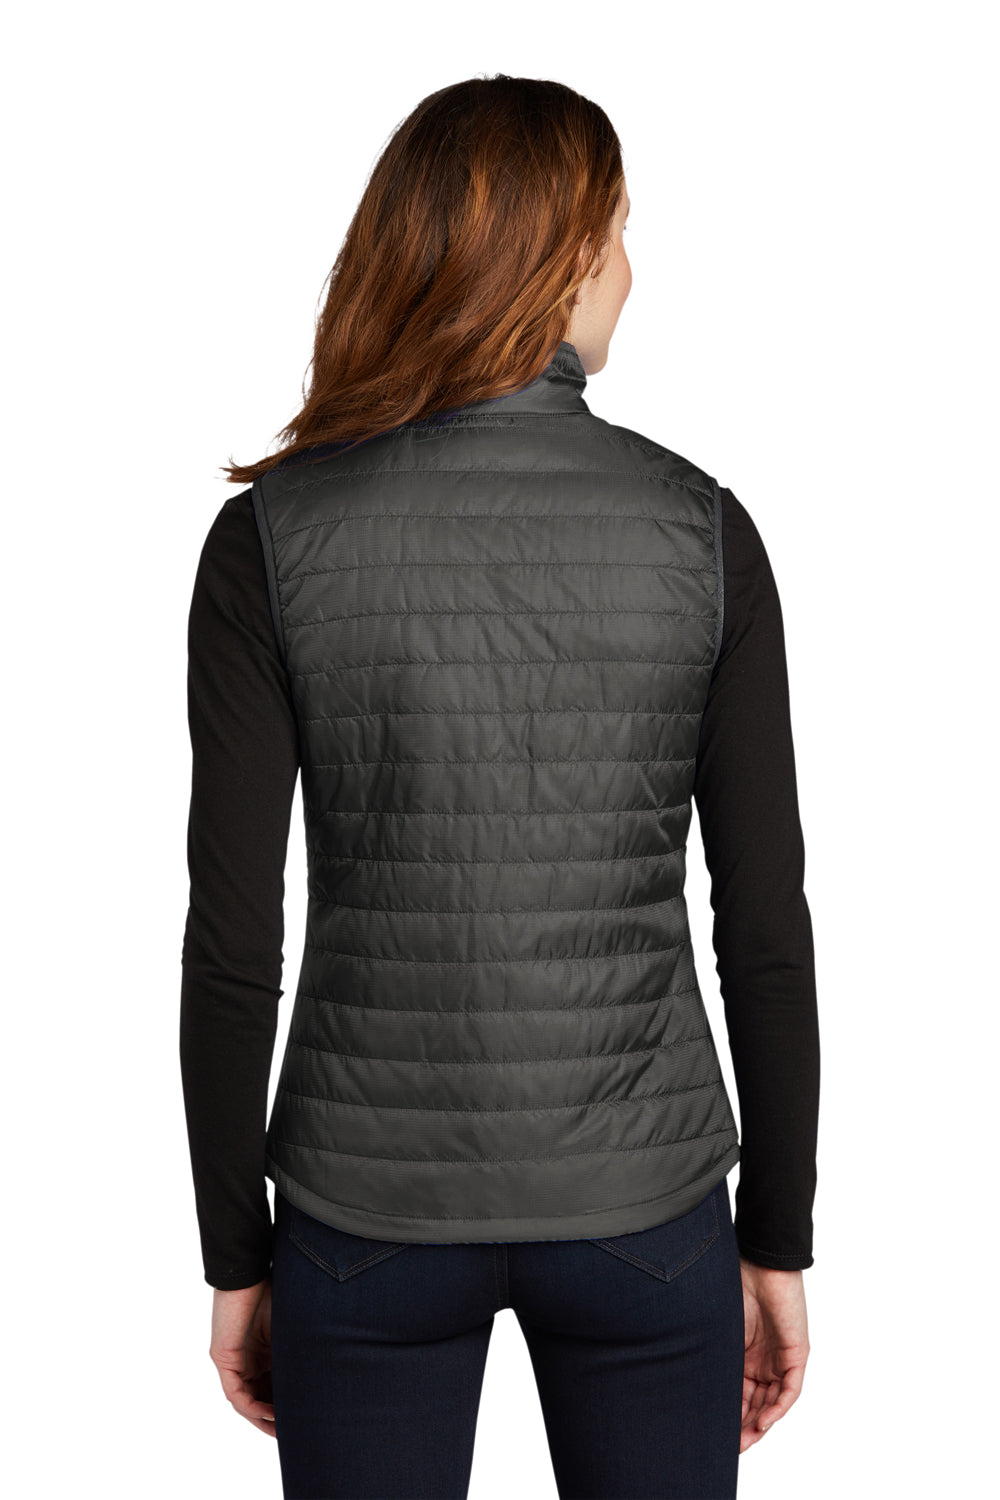 Port Authority Womens Packable Puffy Full Zip Vest Sterling Grey/Graphite Grey Side